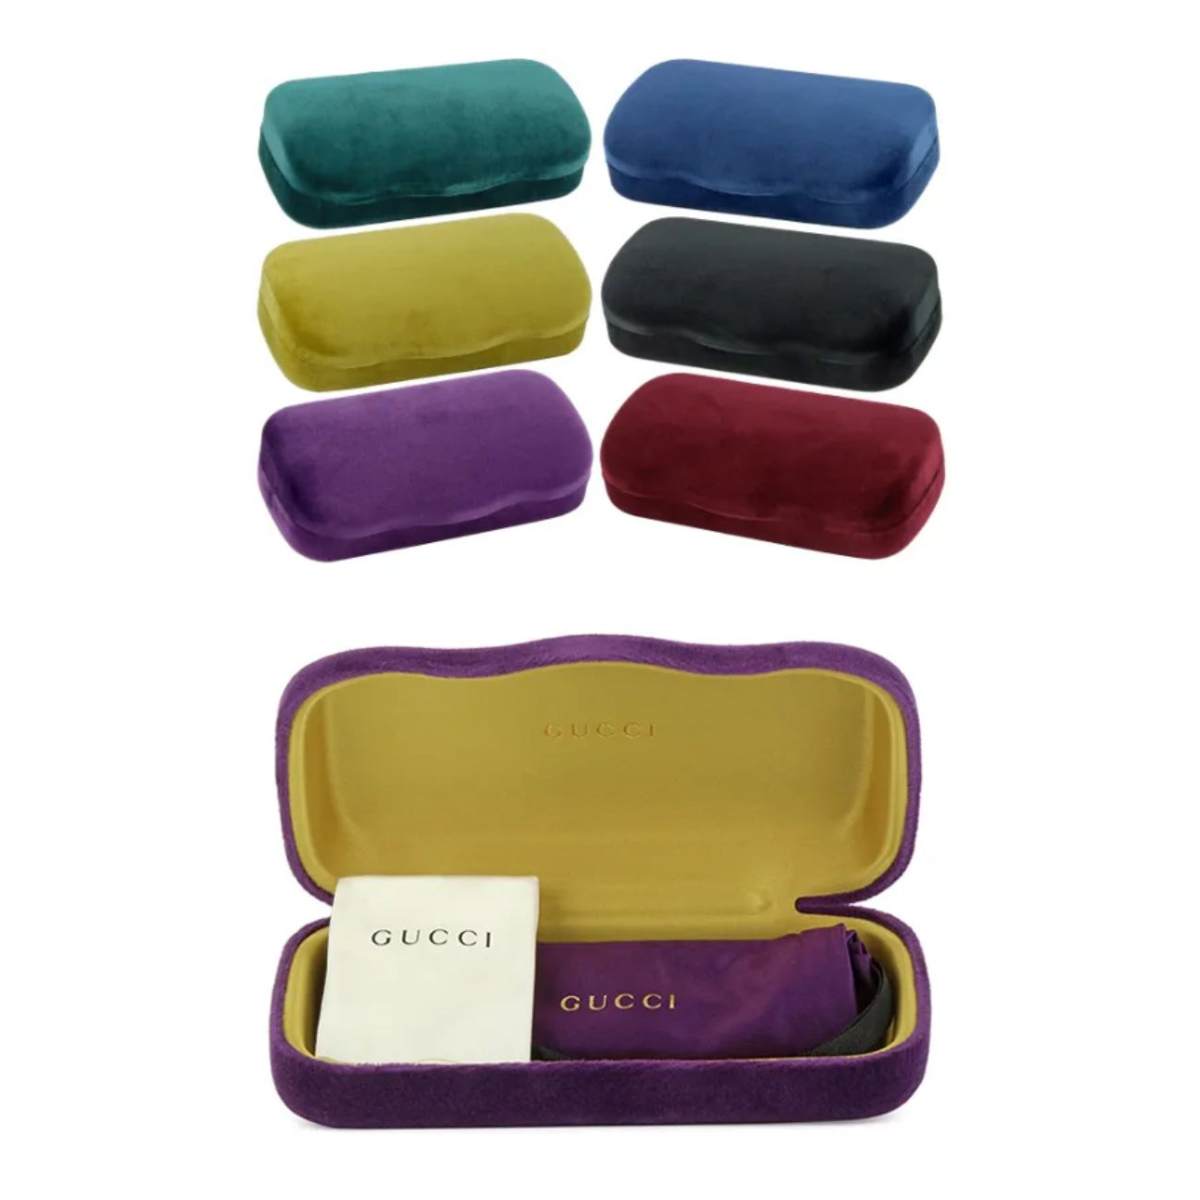 "Gucci Optical Frame Cases | Available At Optorium"